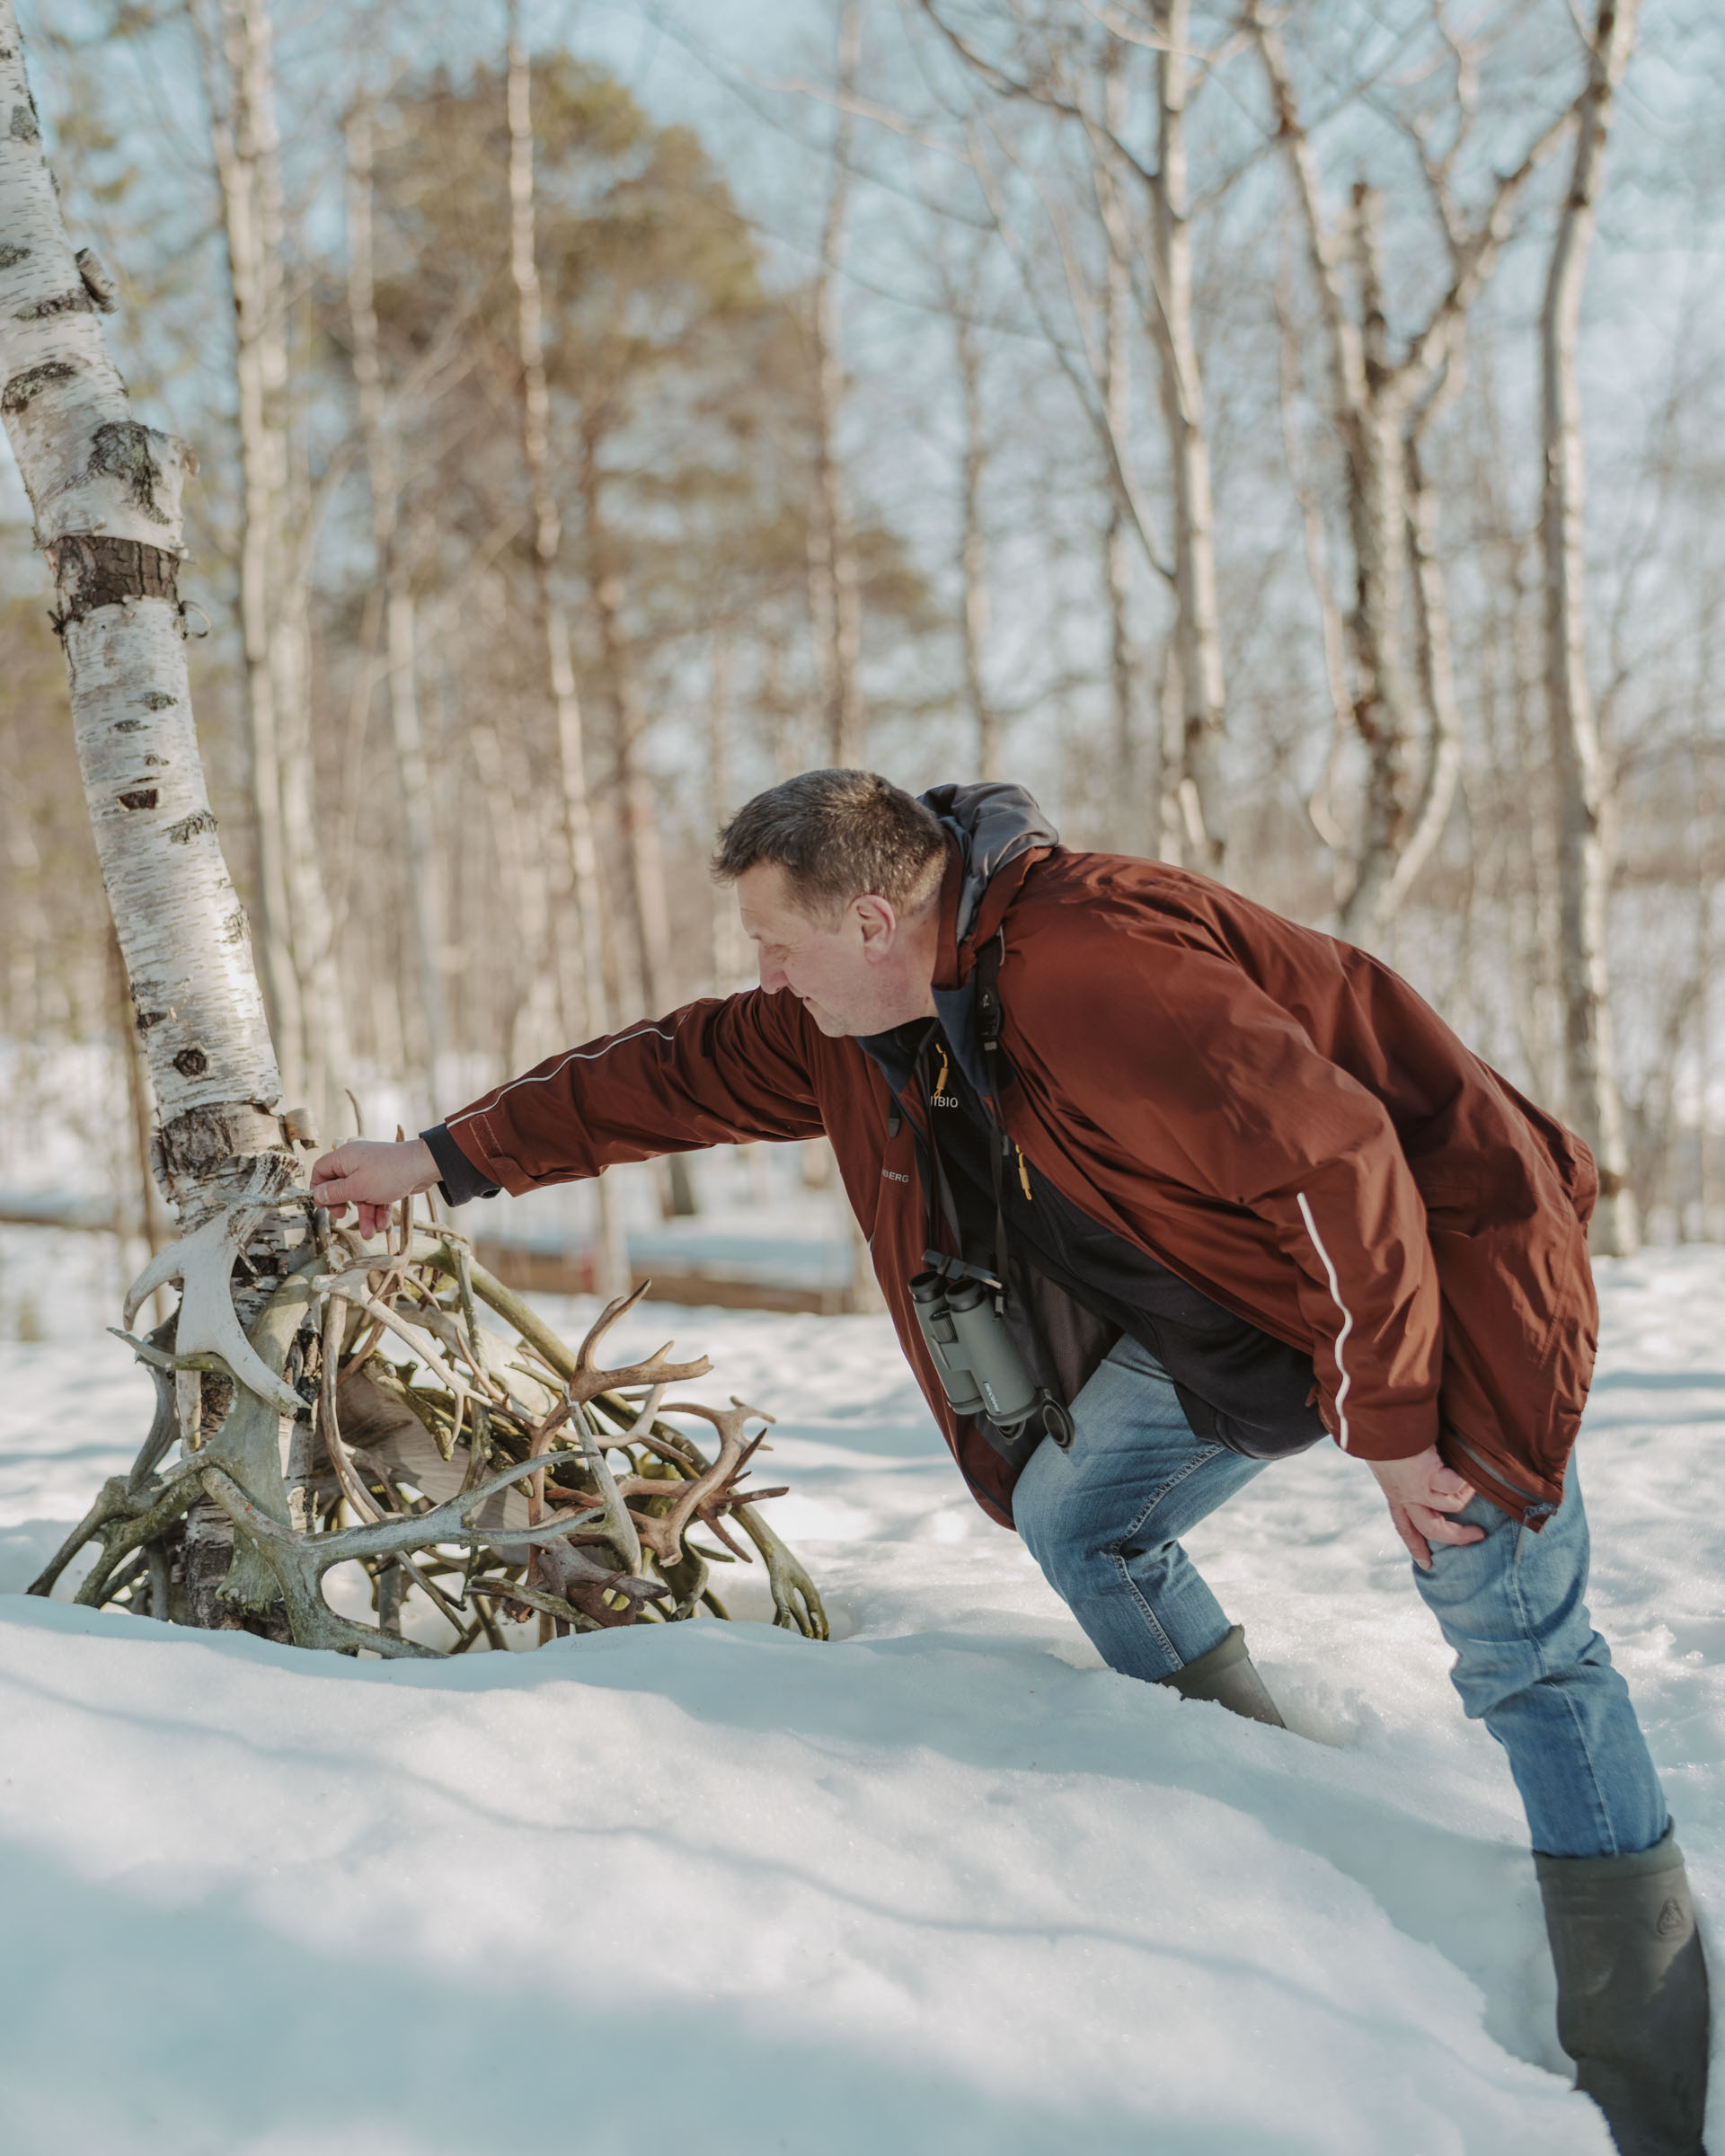 Environmental researcher Paul Aspholm places reindeer antlers collected from carcasses in the field onto a pile at his home in Svanhovd.